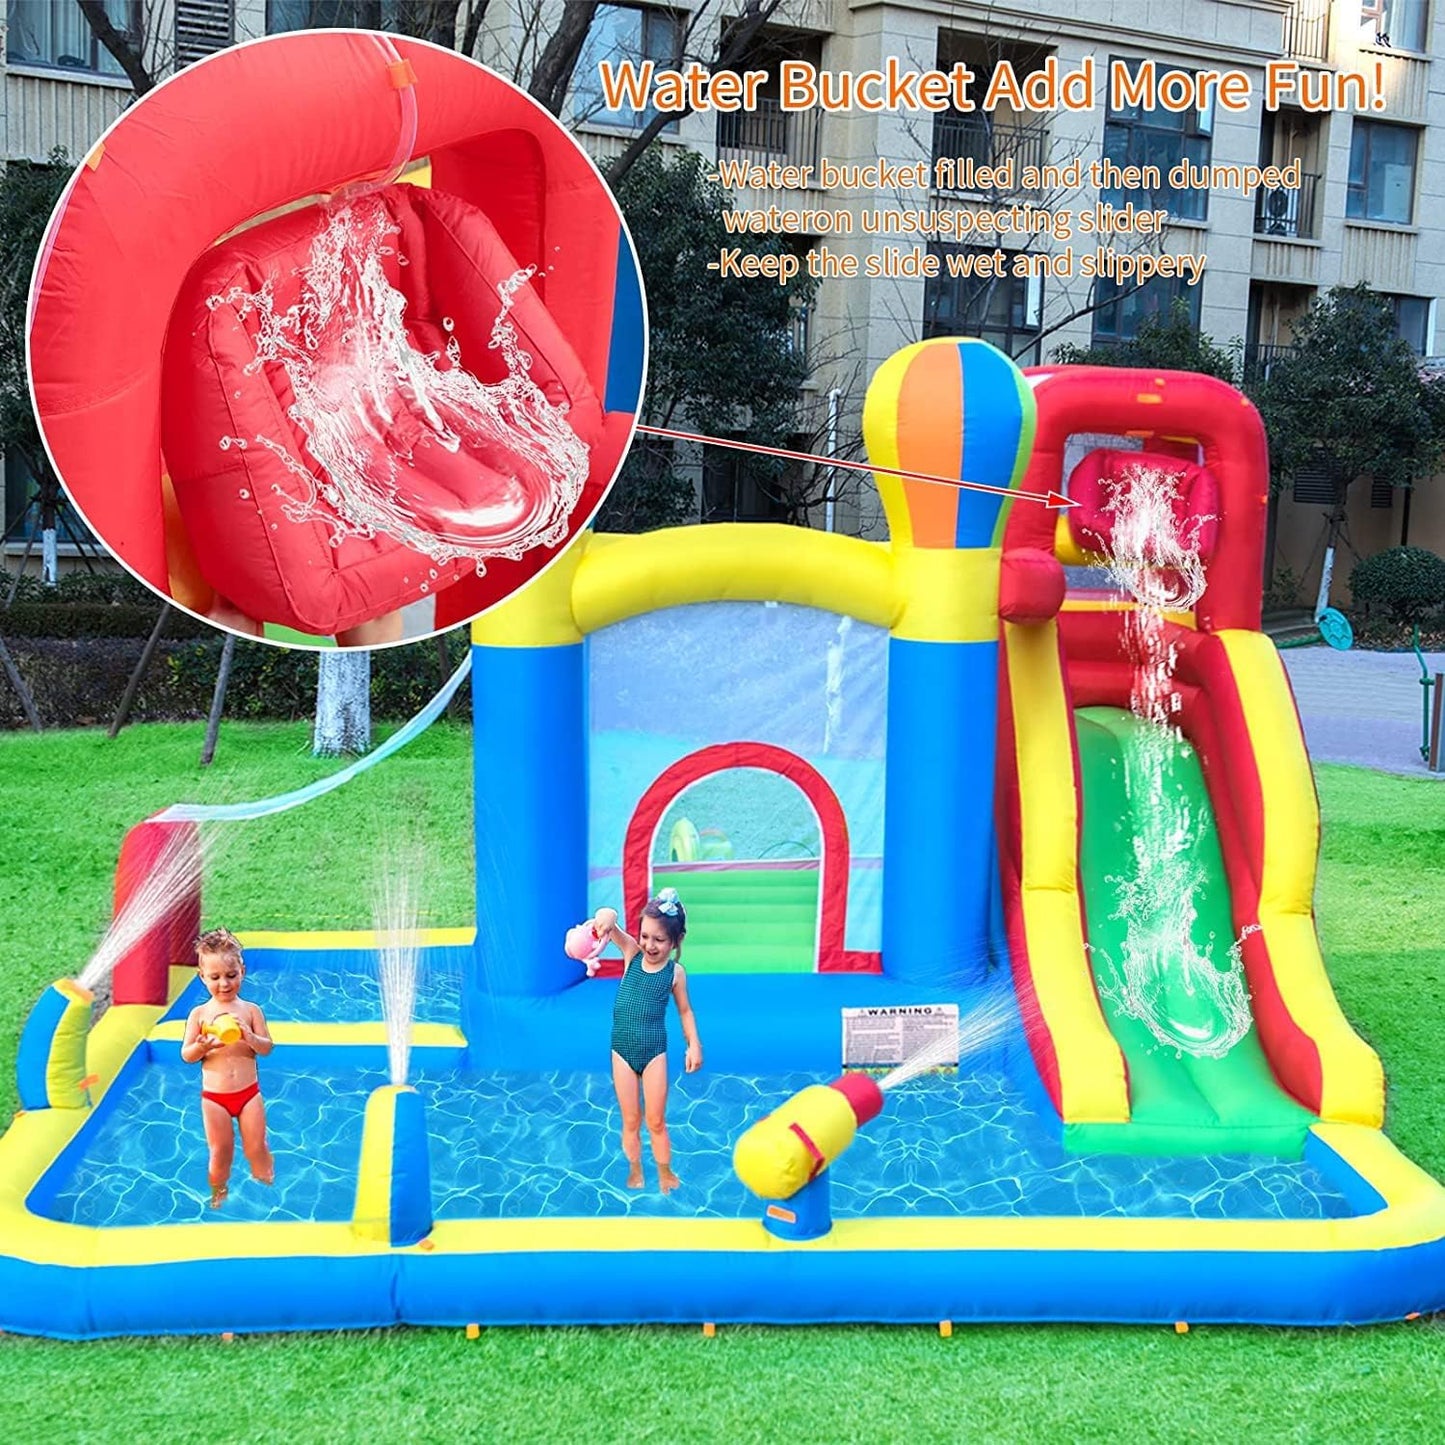 Ballsea Bouncy Castle, Inflatable Bounce Castle House with Blower for Kids Age 3-8, Sweet House Design 3.35 x 2.8 x 2.06m